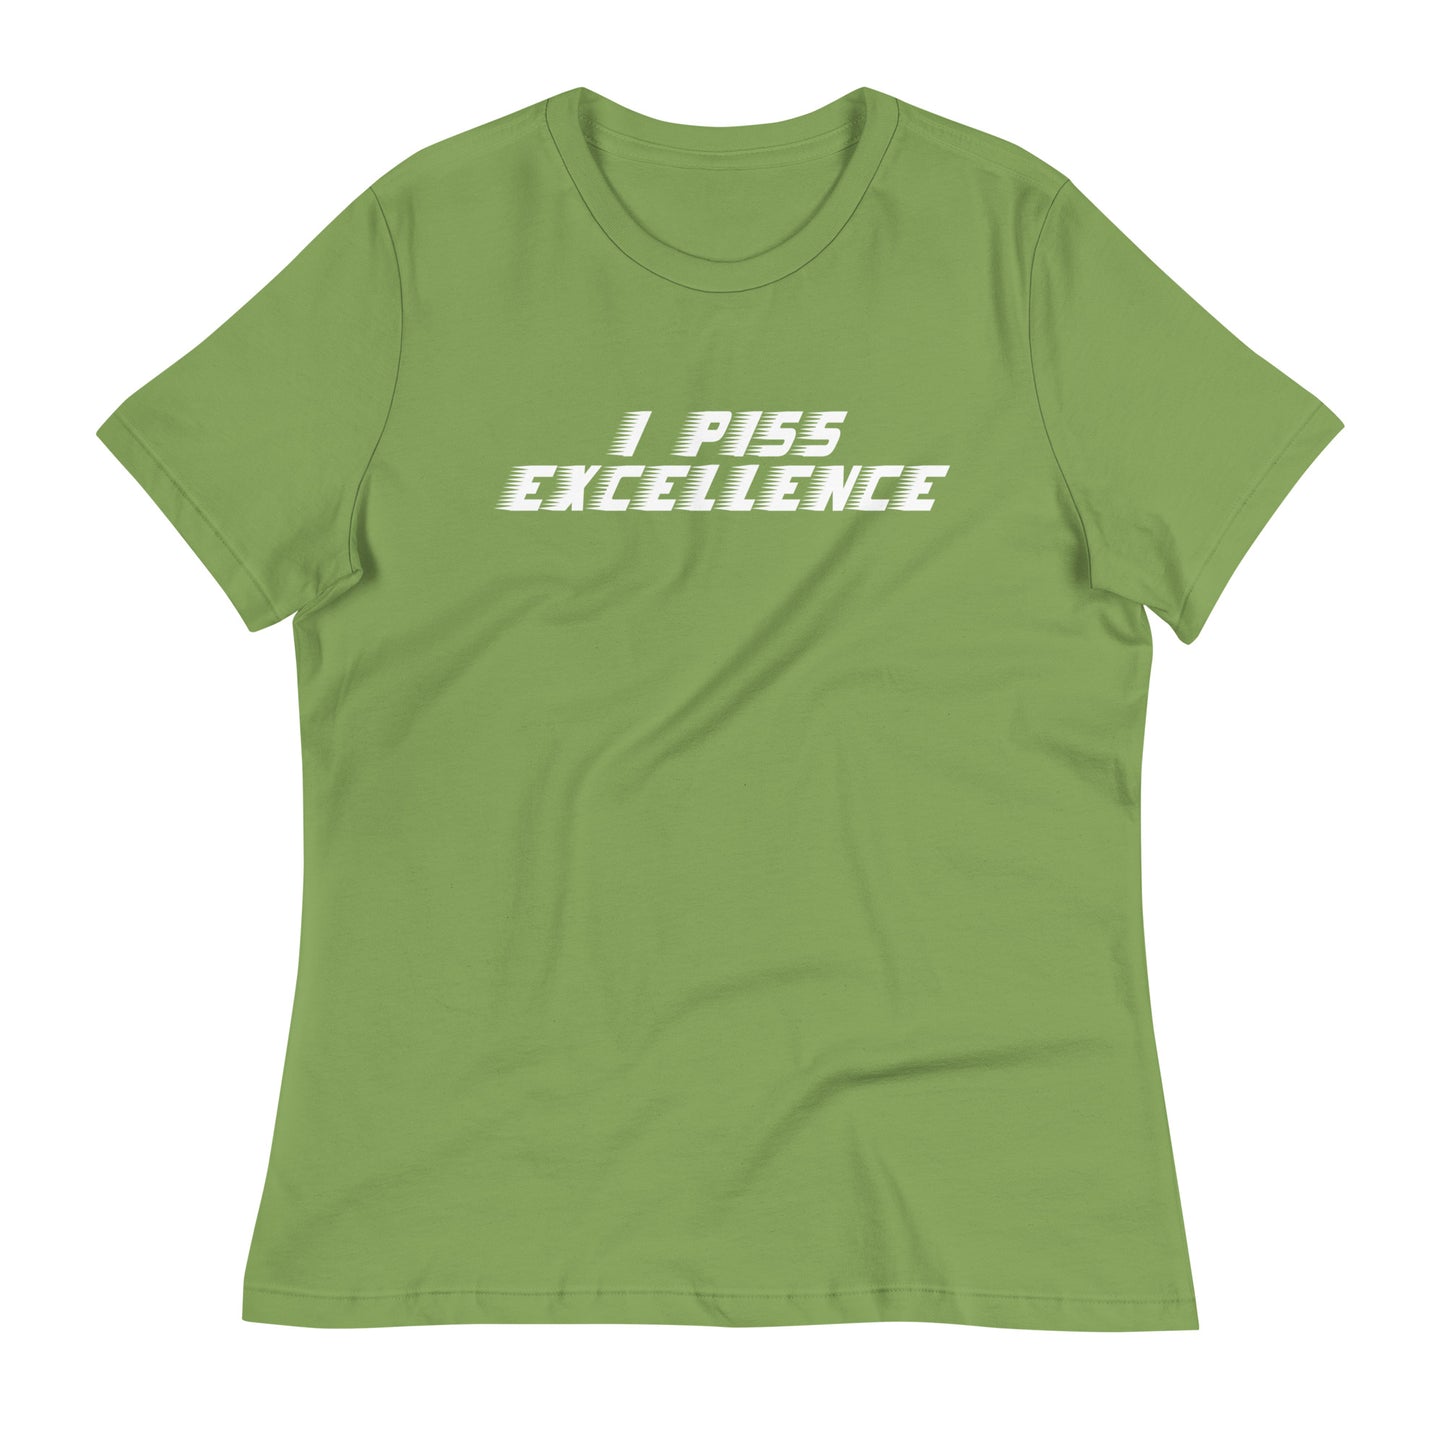 I Piss Excellence Women's Signature Tee